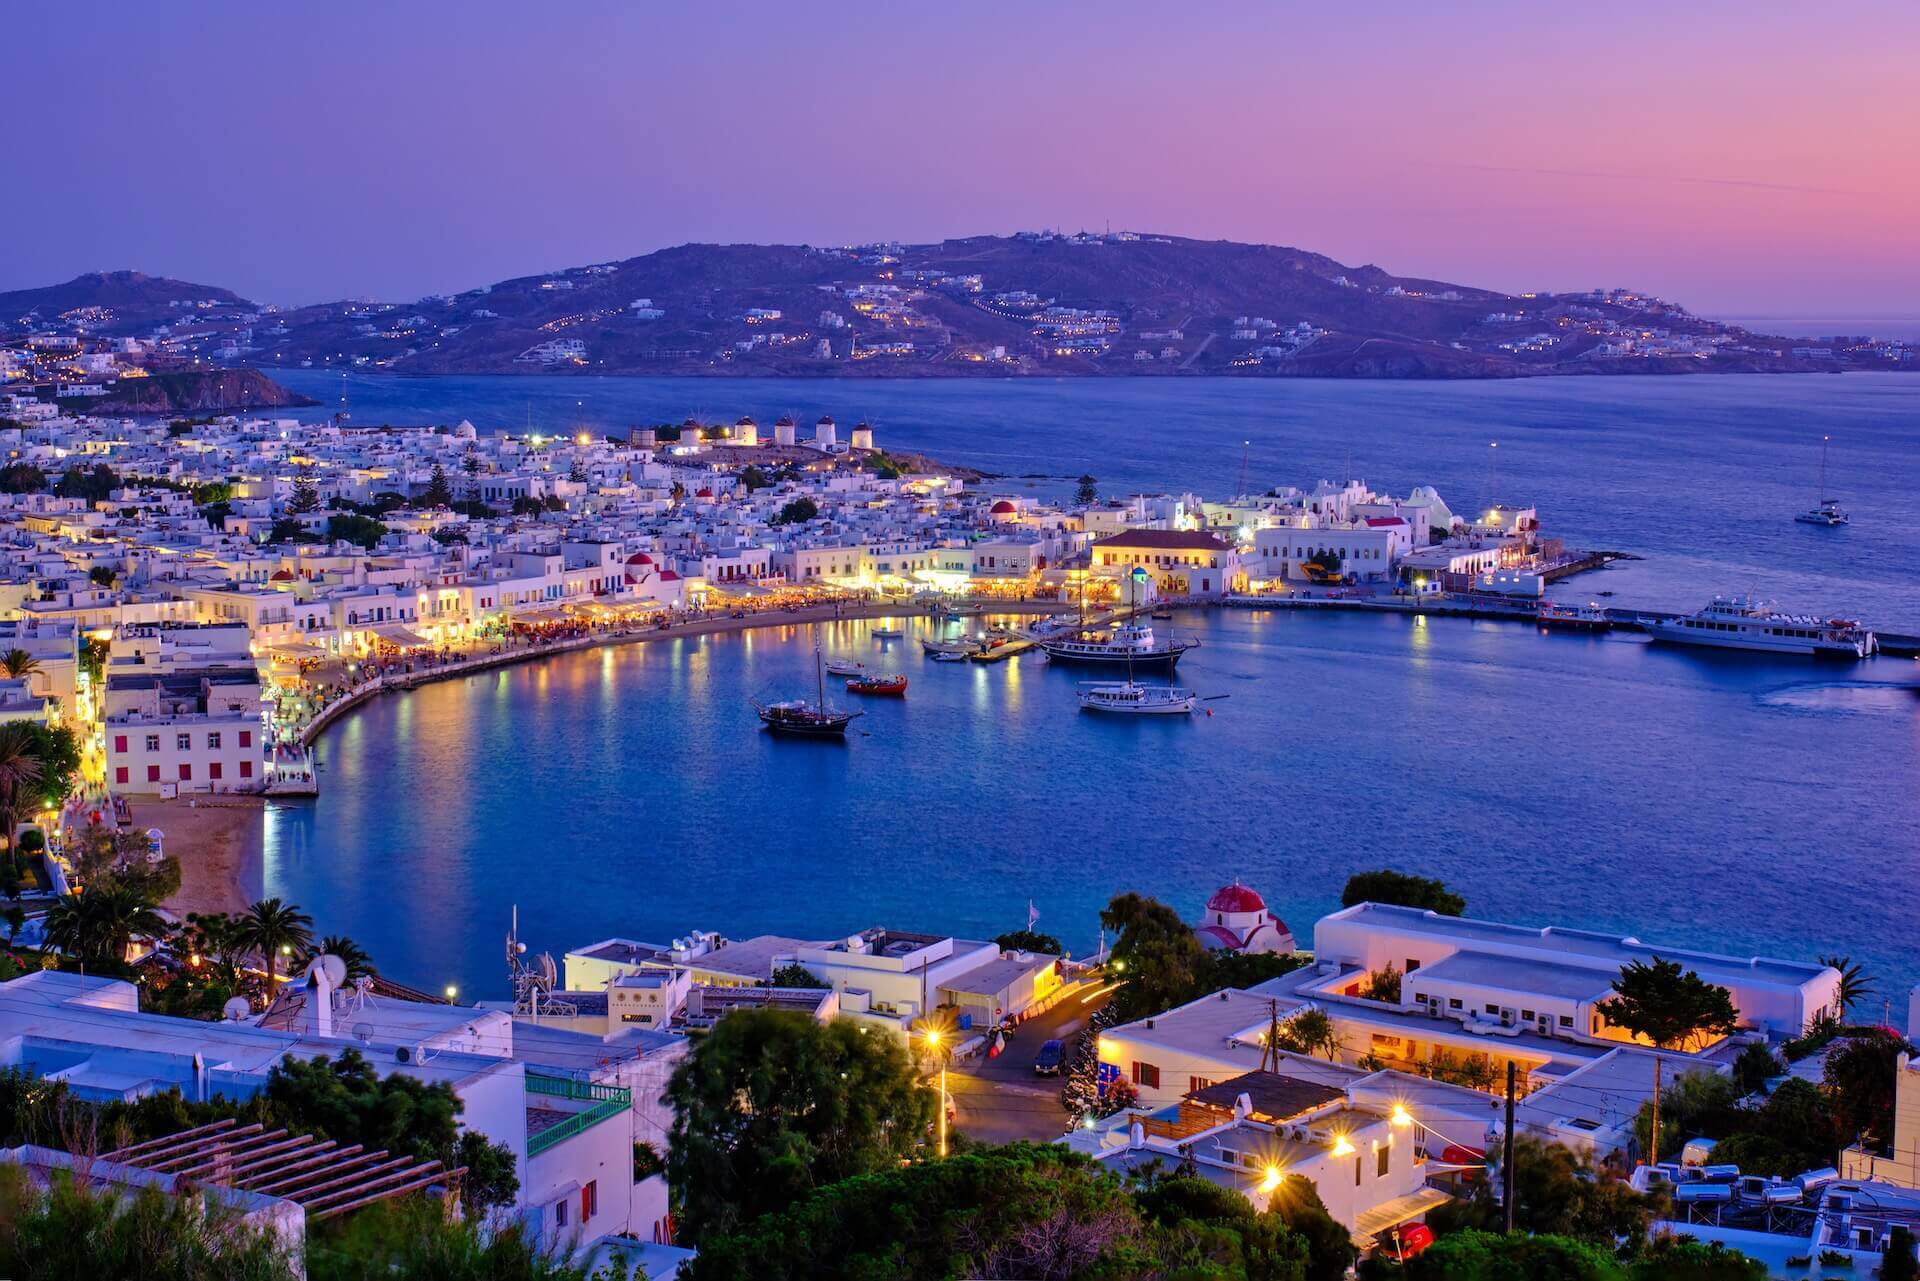 A view of Mykonos town from an outlook